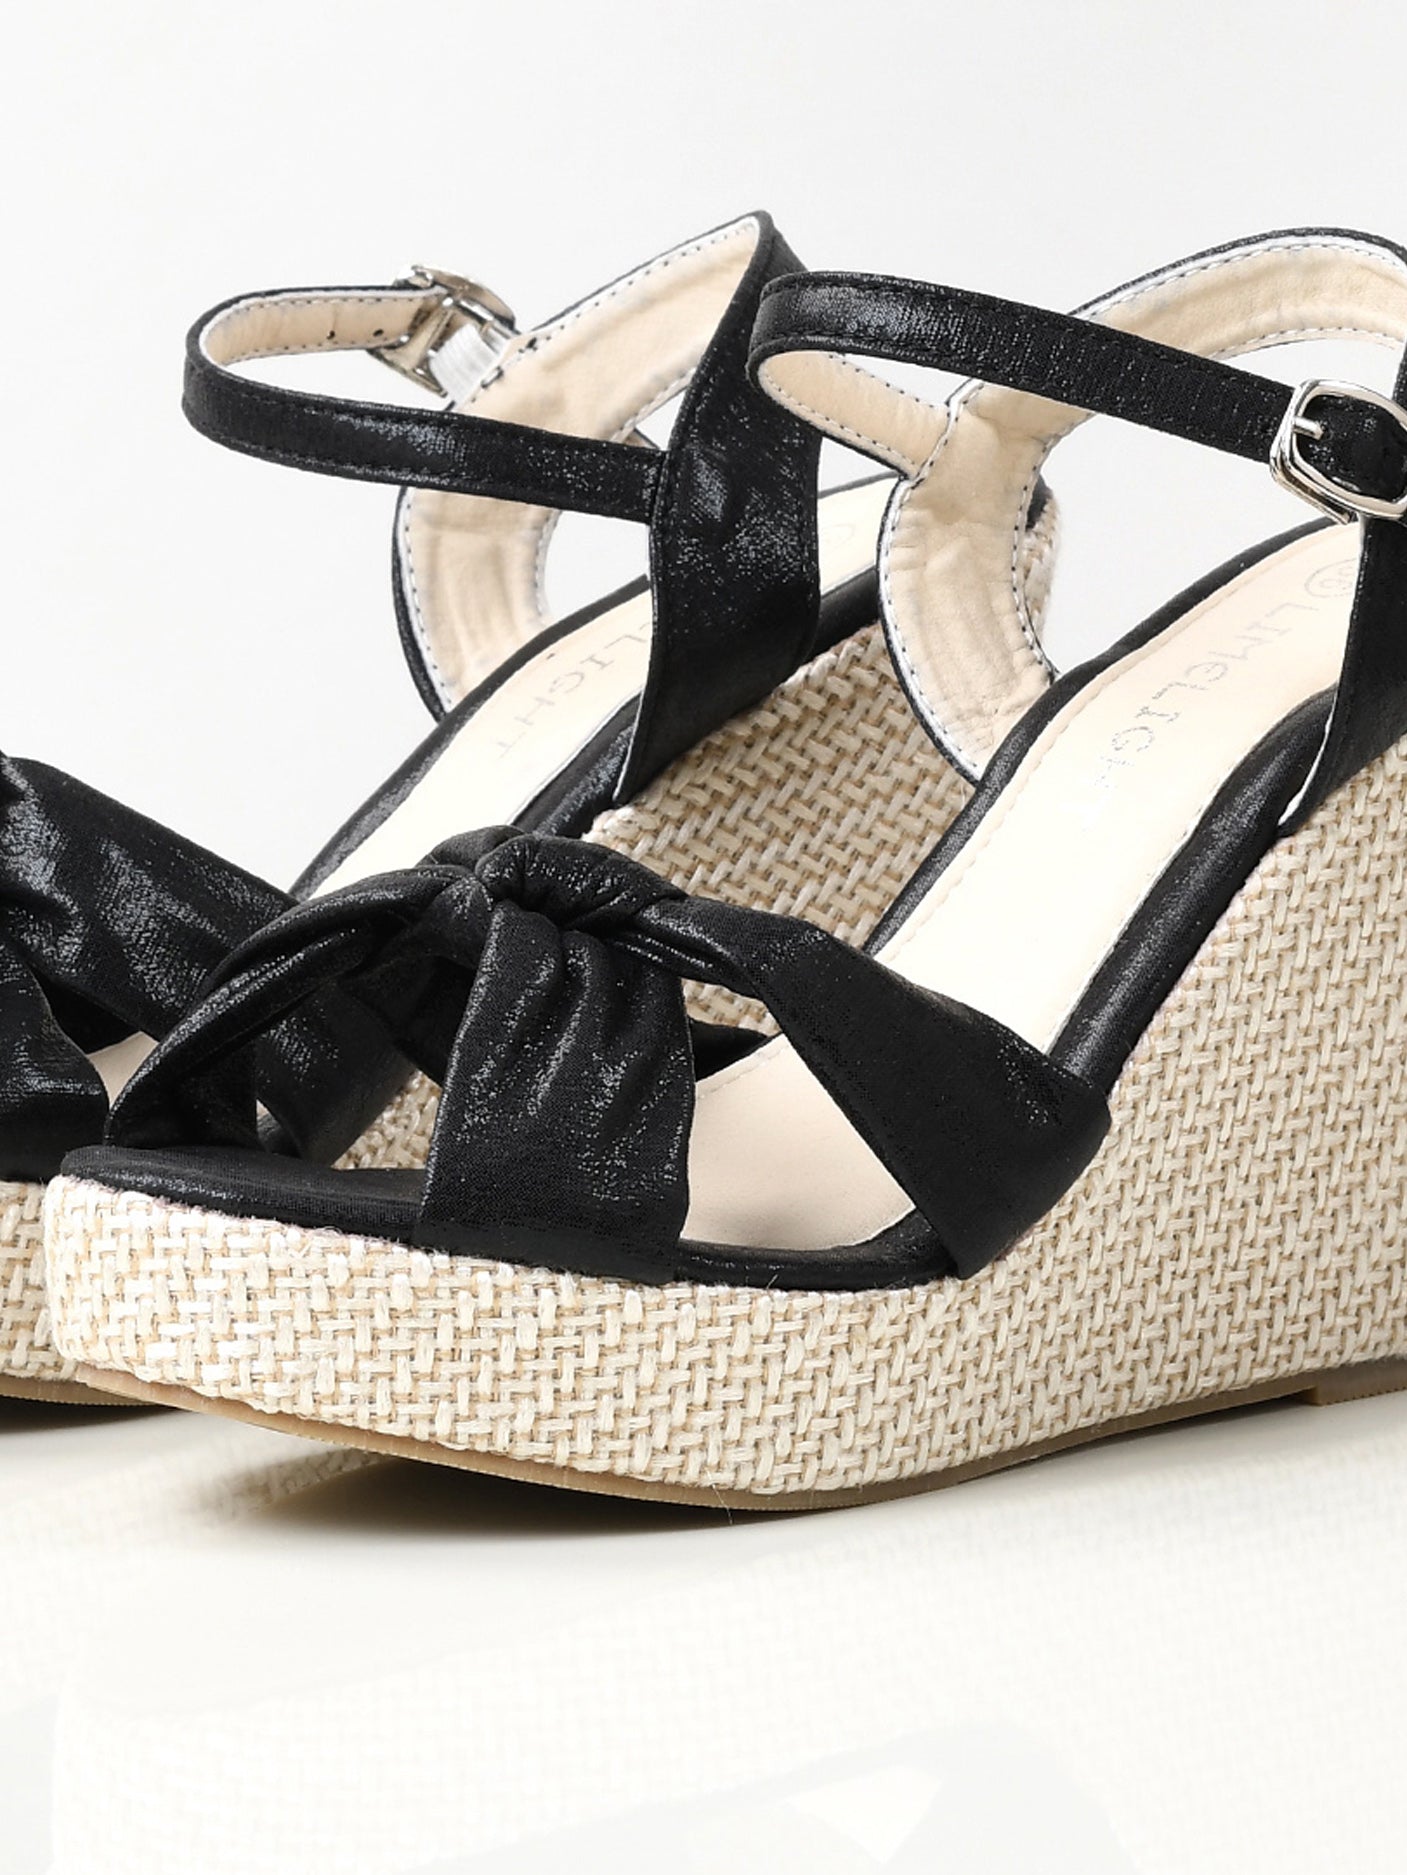 Shiny Knotted Wedges - Black